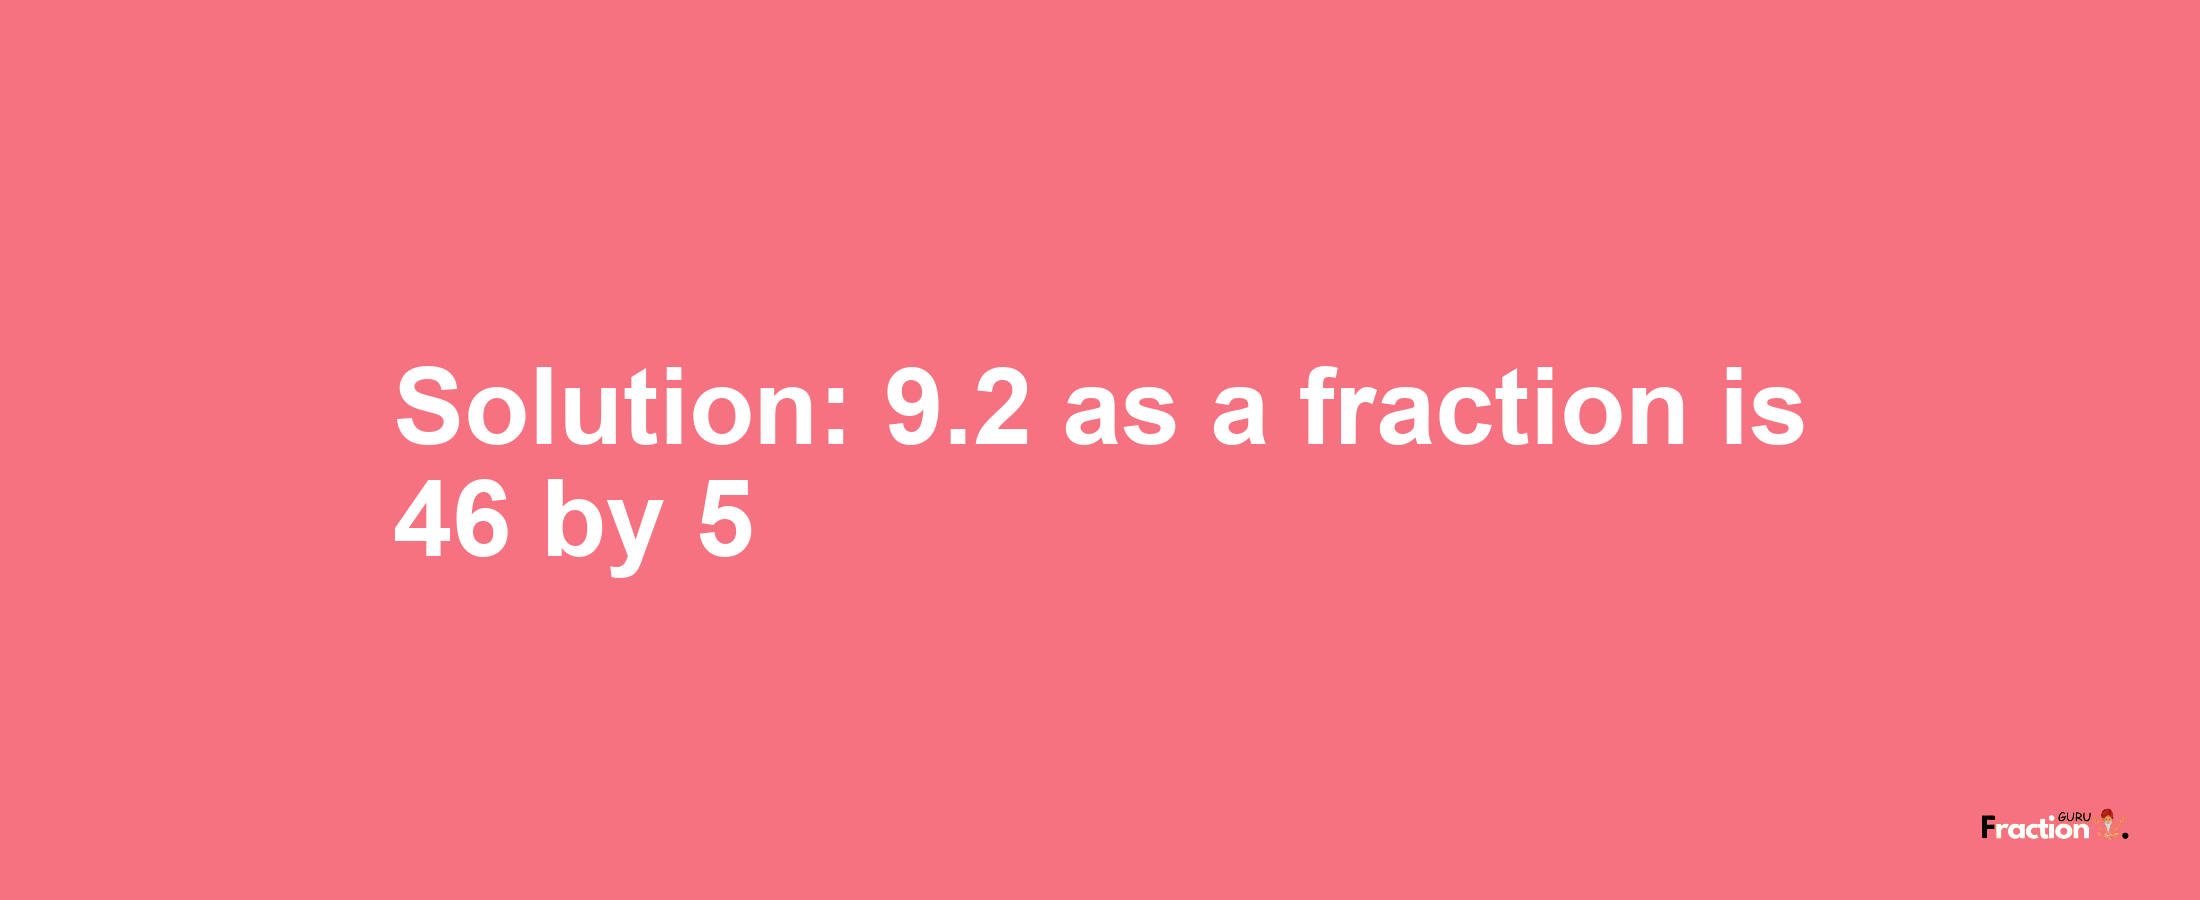 Solution:9.2 as a fraction is 46/5